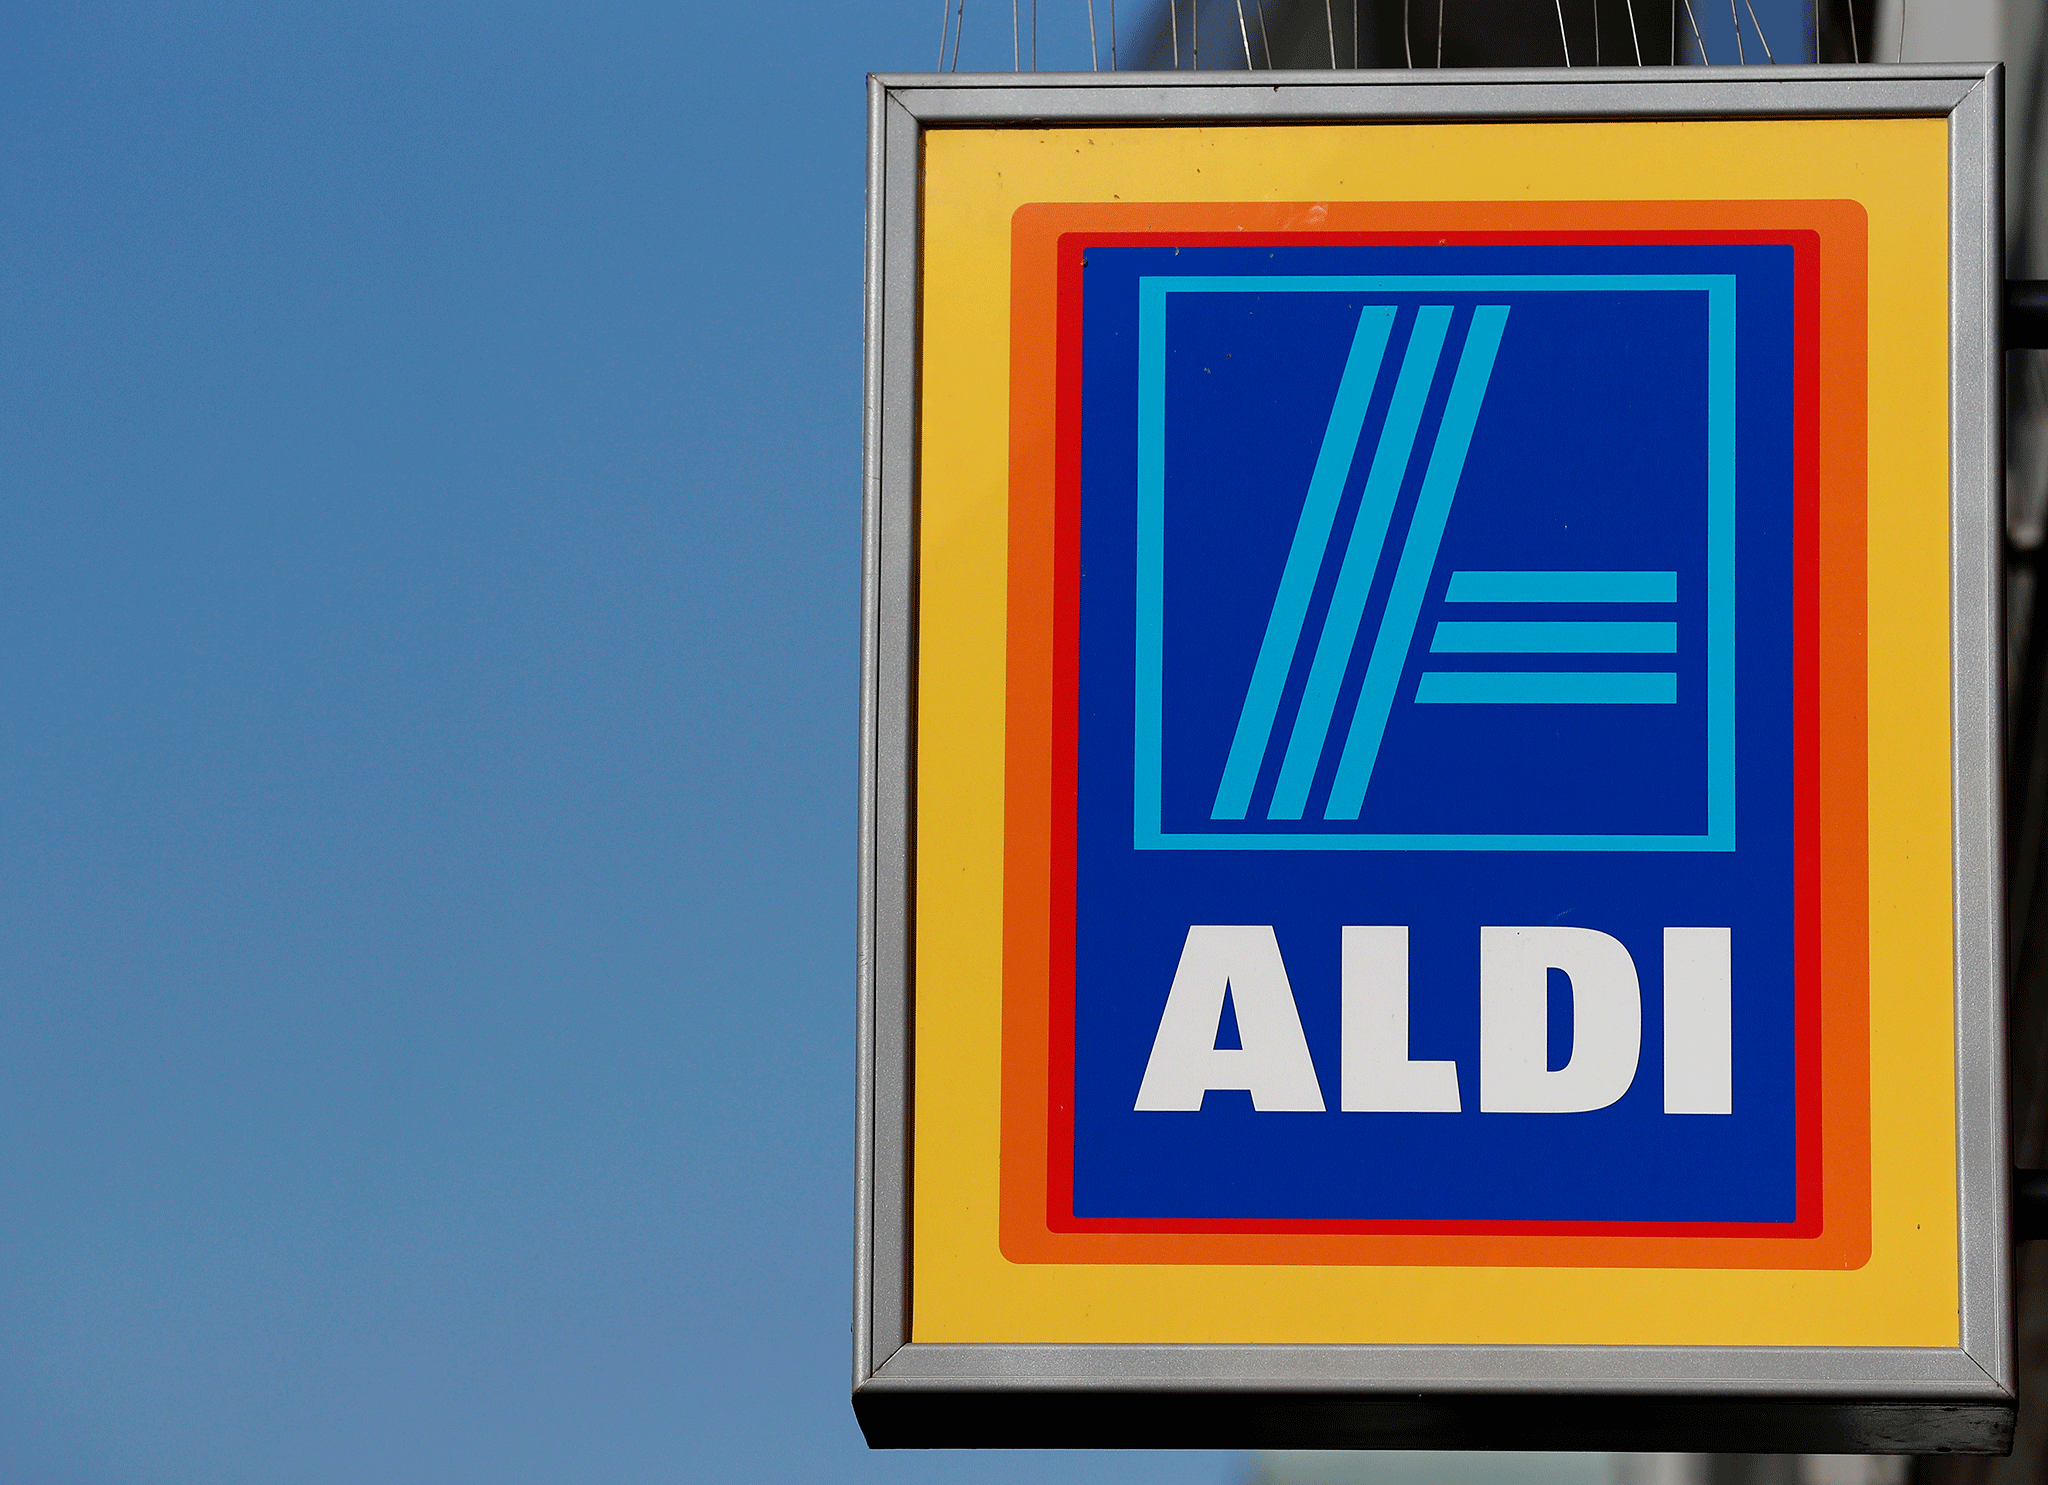 Aldi Shoppers Urged To Check Bank Accounts After Supermarket Charges Thousands Of Customers Twice The Independent The Independent